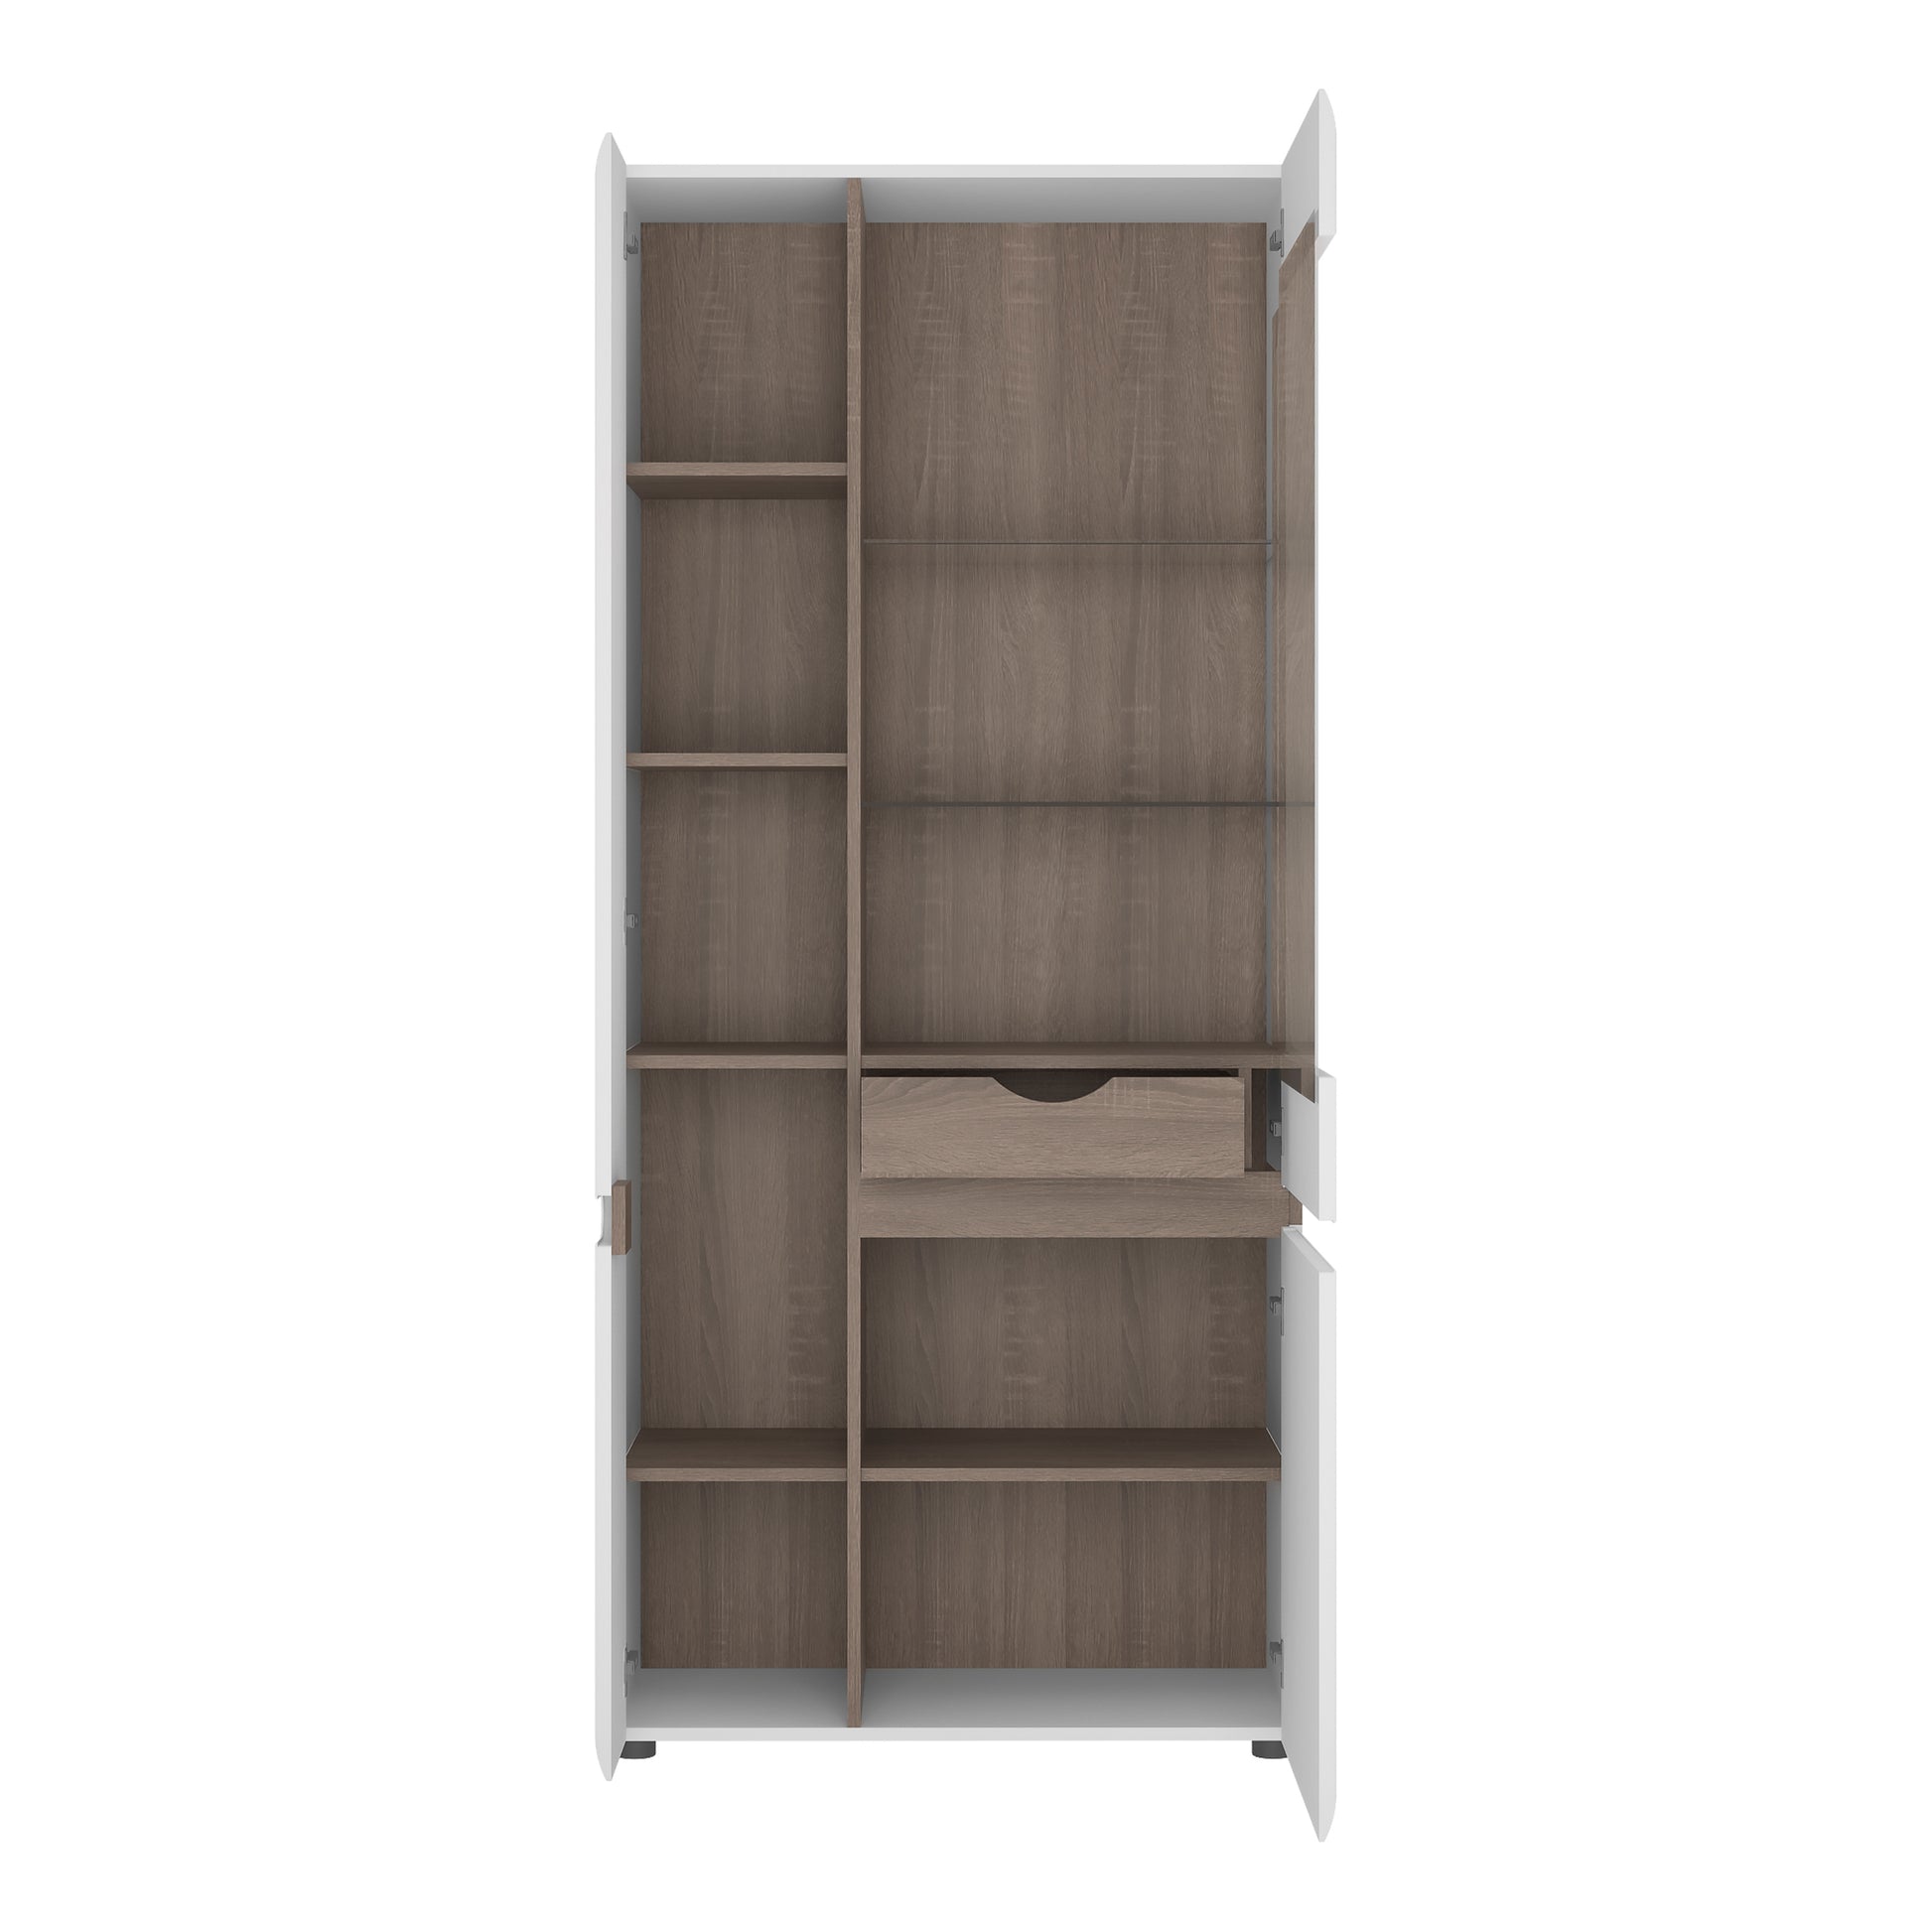 Chelsea  Tall Glazed Wide Display unit (LHD) in White with Oak Trim